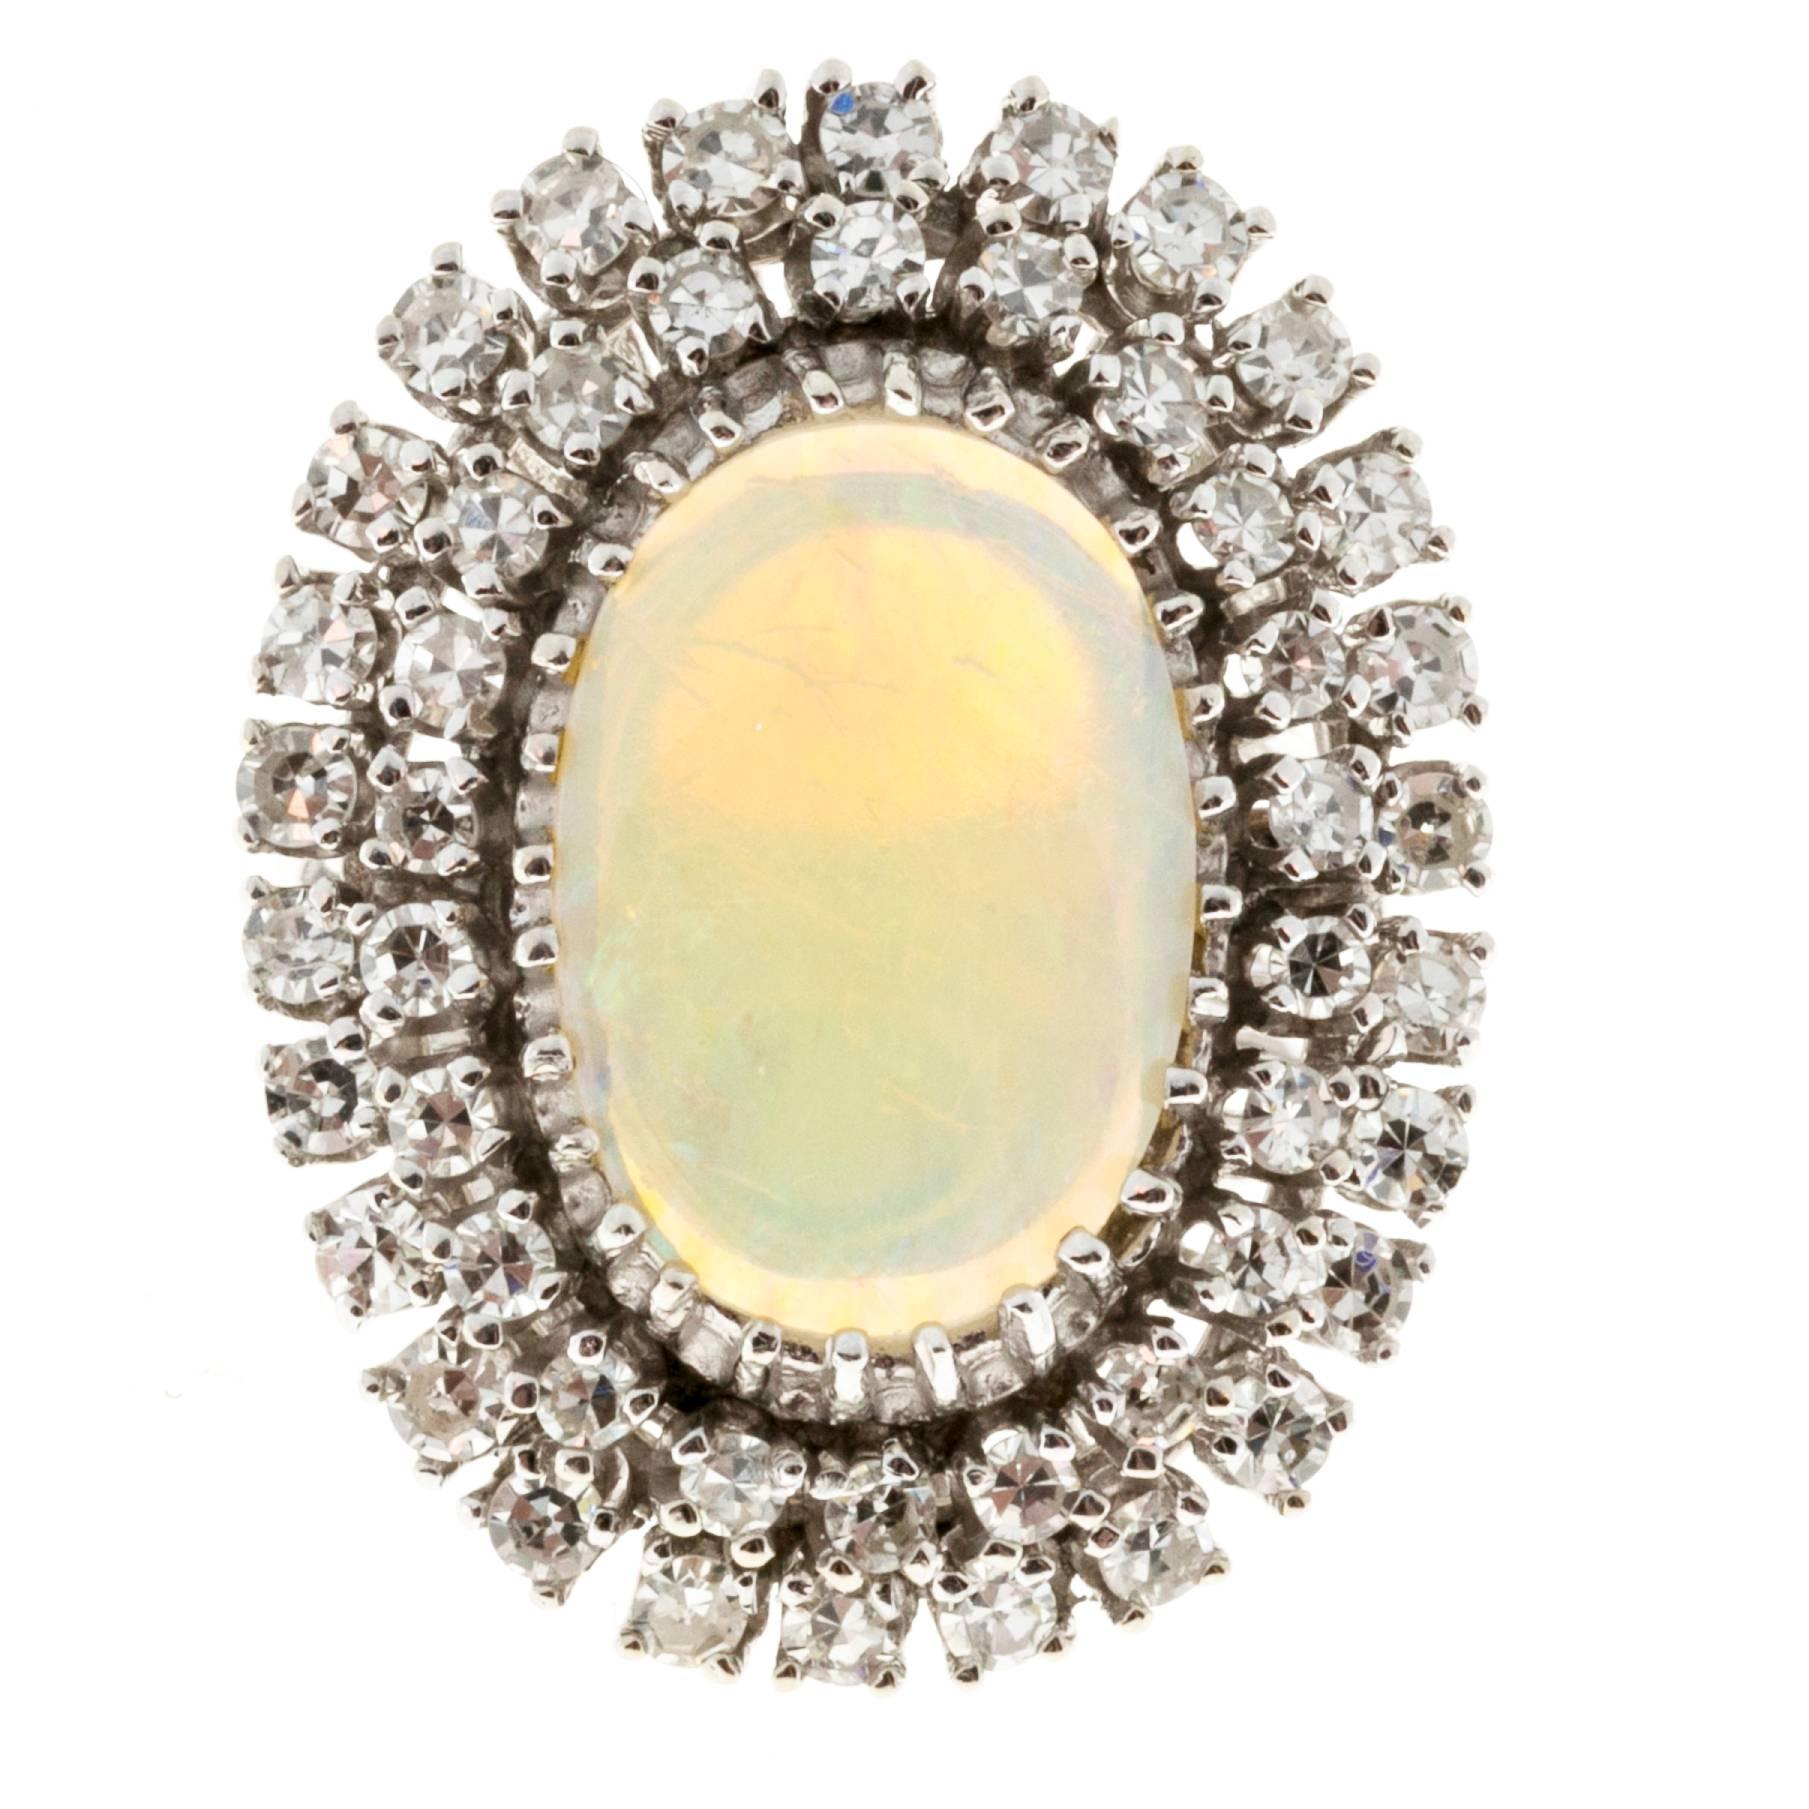 1960’s handmade wire construction crystal greenish blue clear opal with gentle swirls of color and hints of orange. The opal is surrounded by 2 rows of bright white single cut diamonds in a classic cocktail style.

1 oval opal 5/8 x 7/16 inch, 16